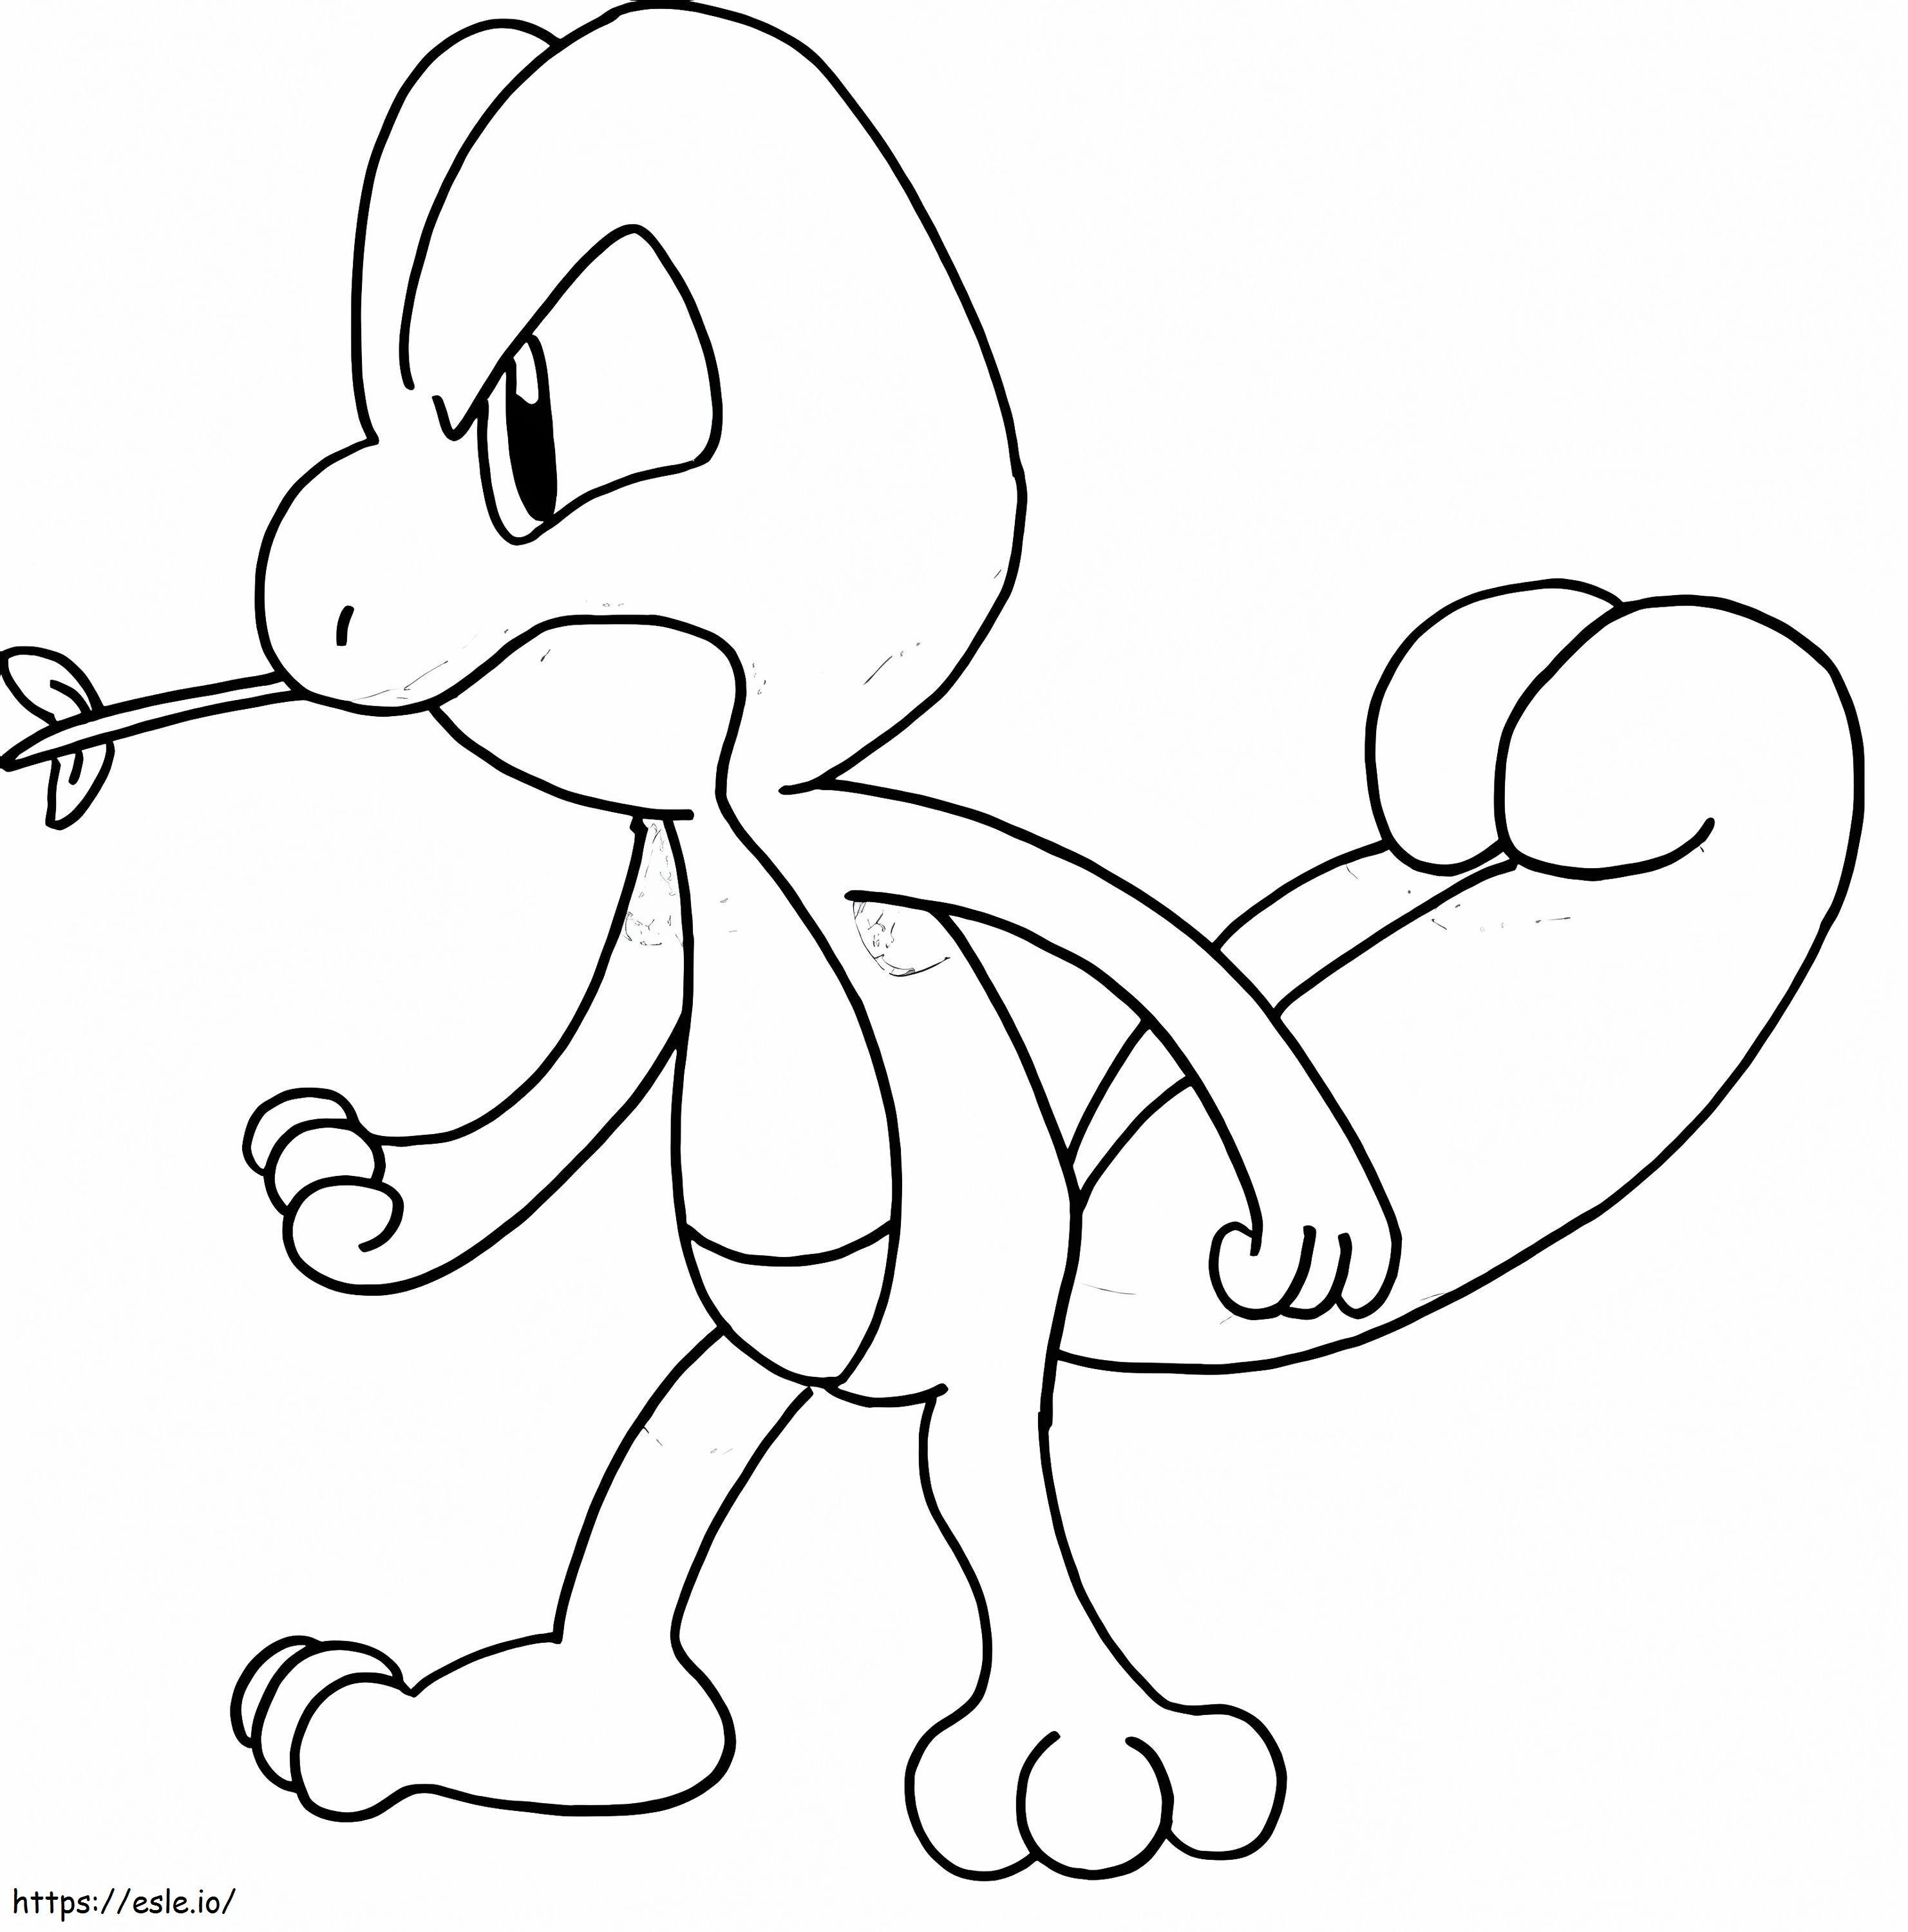 Angry Treecko coloring page